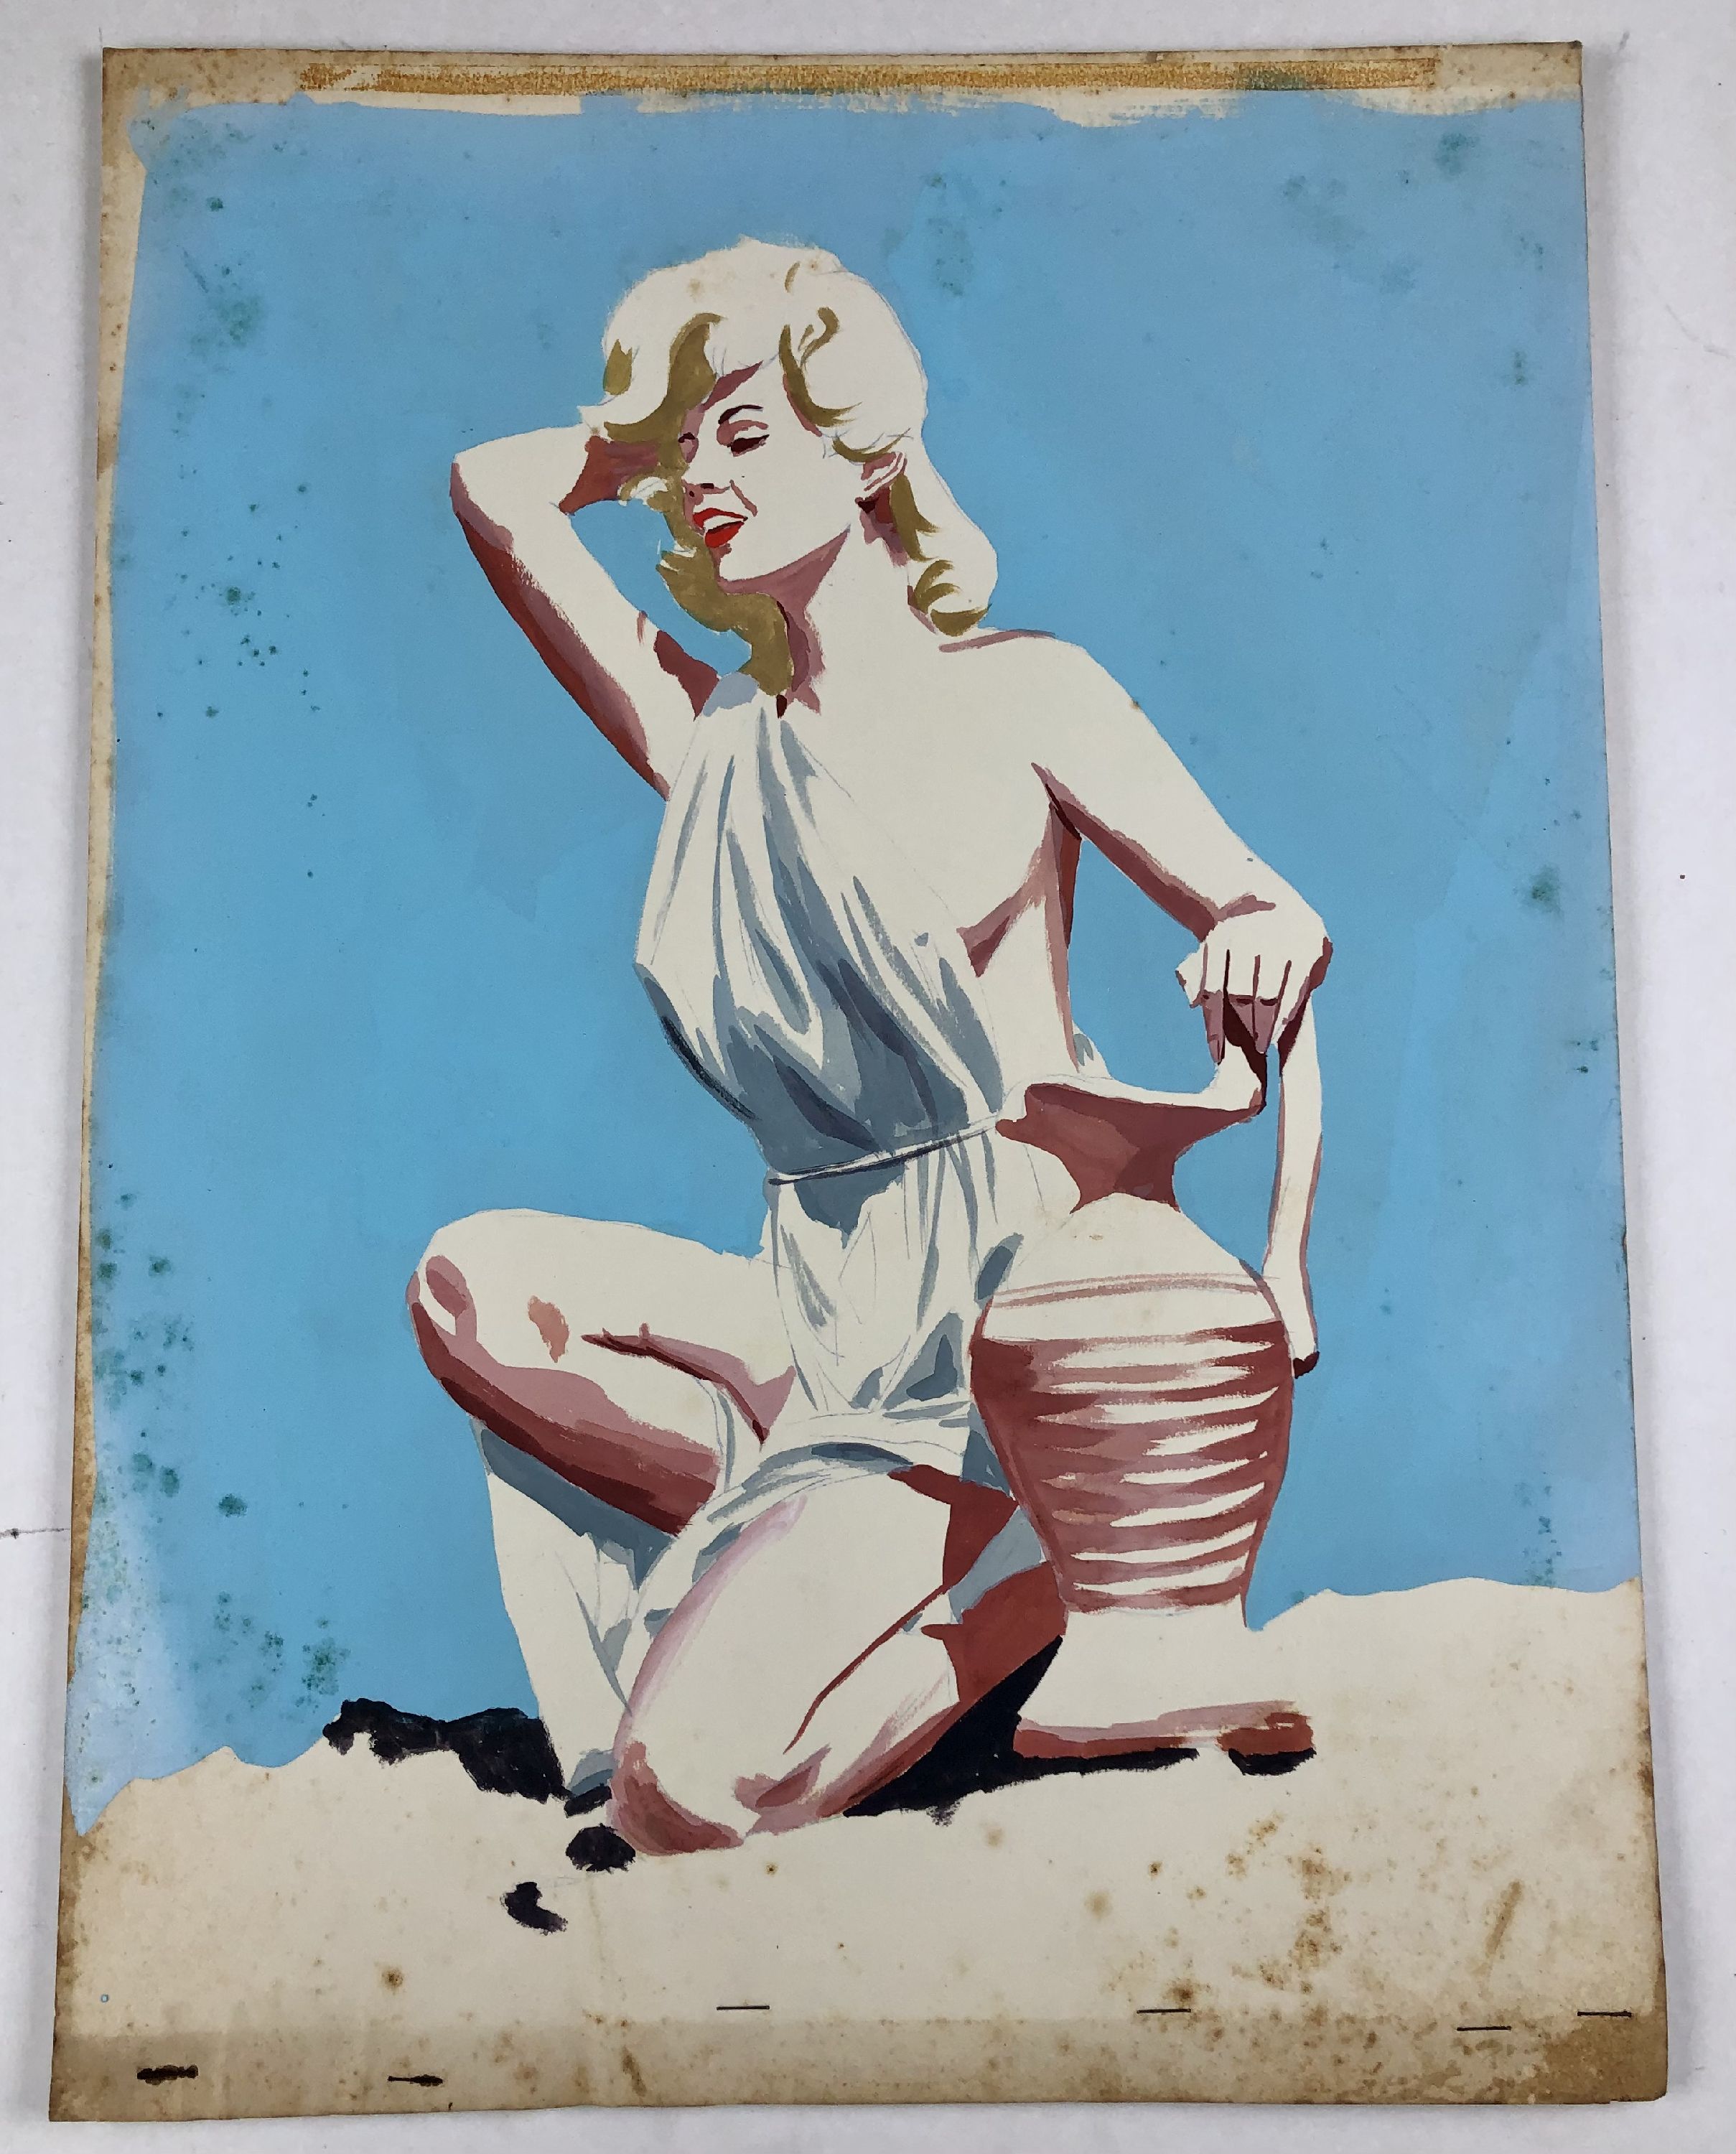 Bunny Yeager, model, in toga kneeling next to clay vase against blue sky (very preliminary)